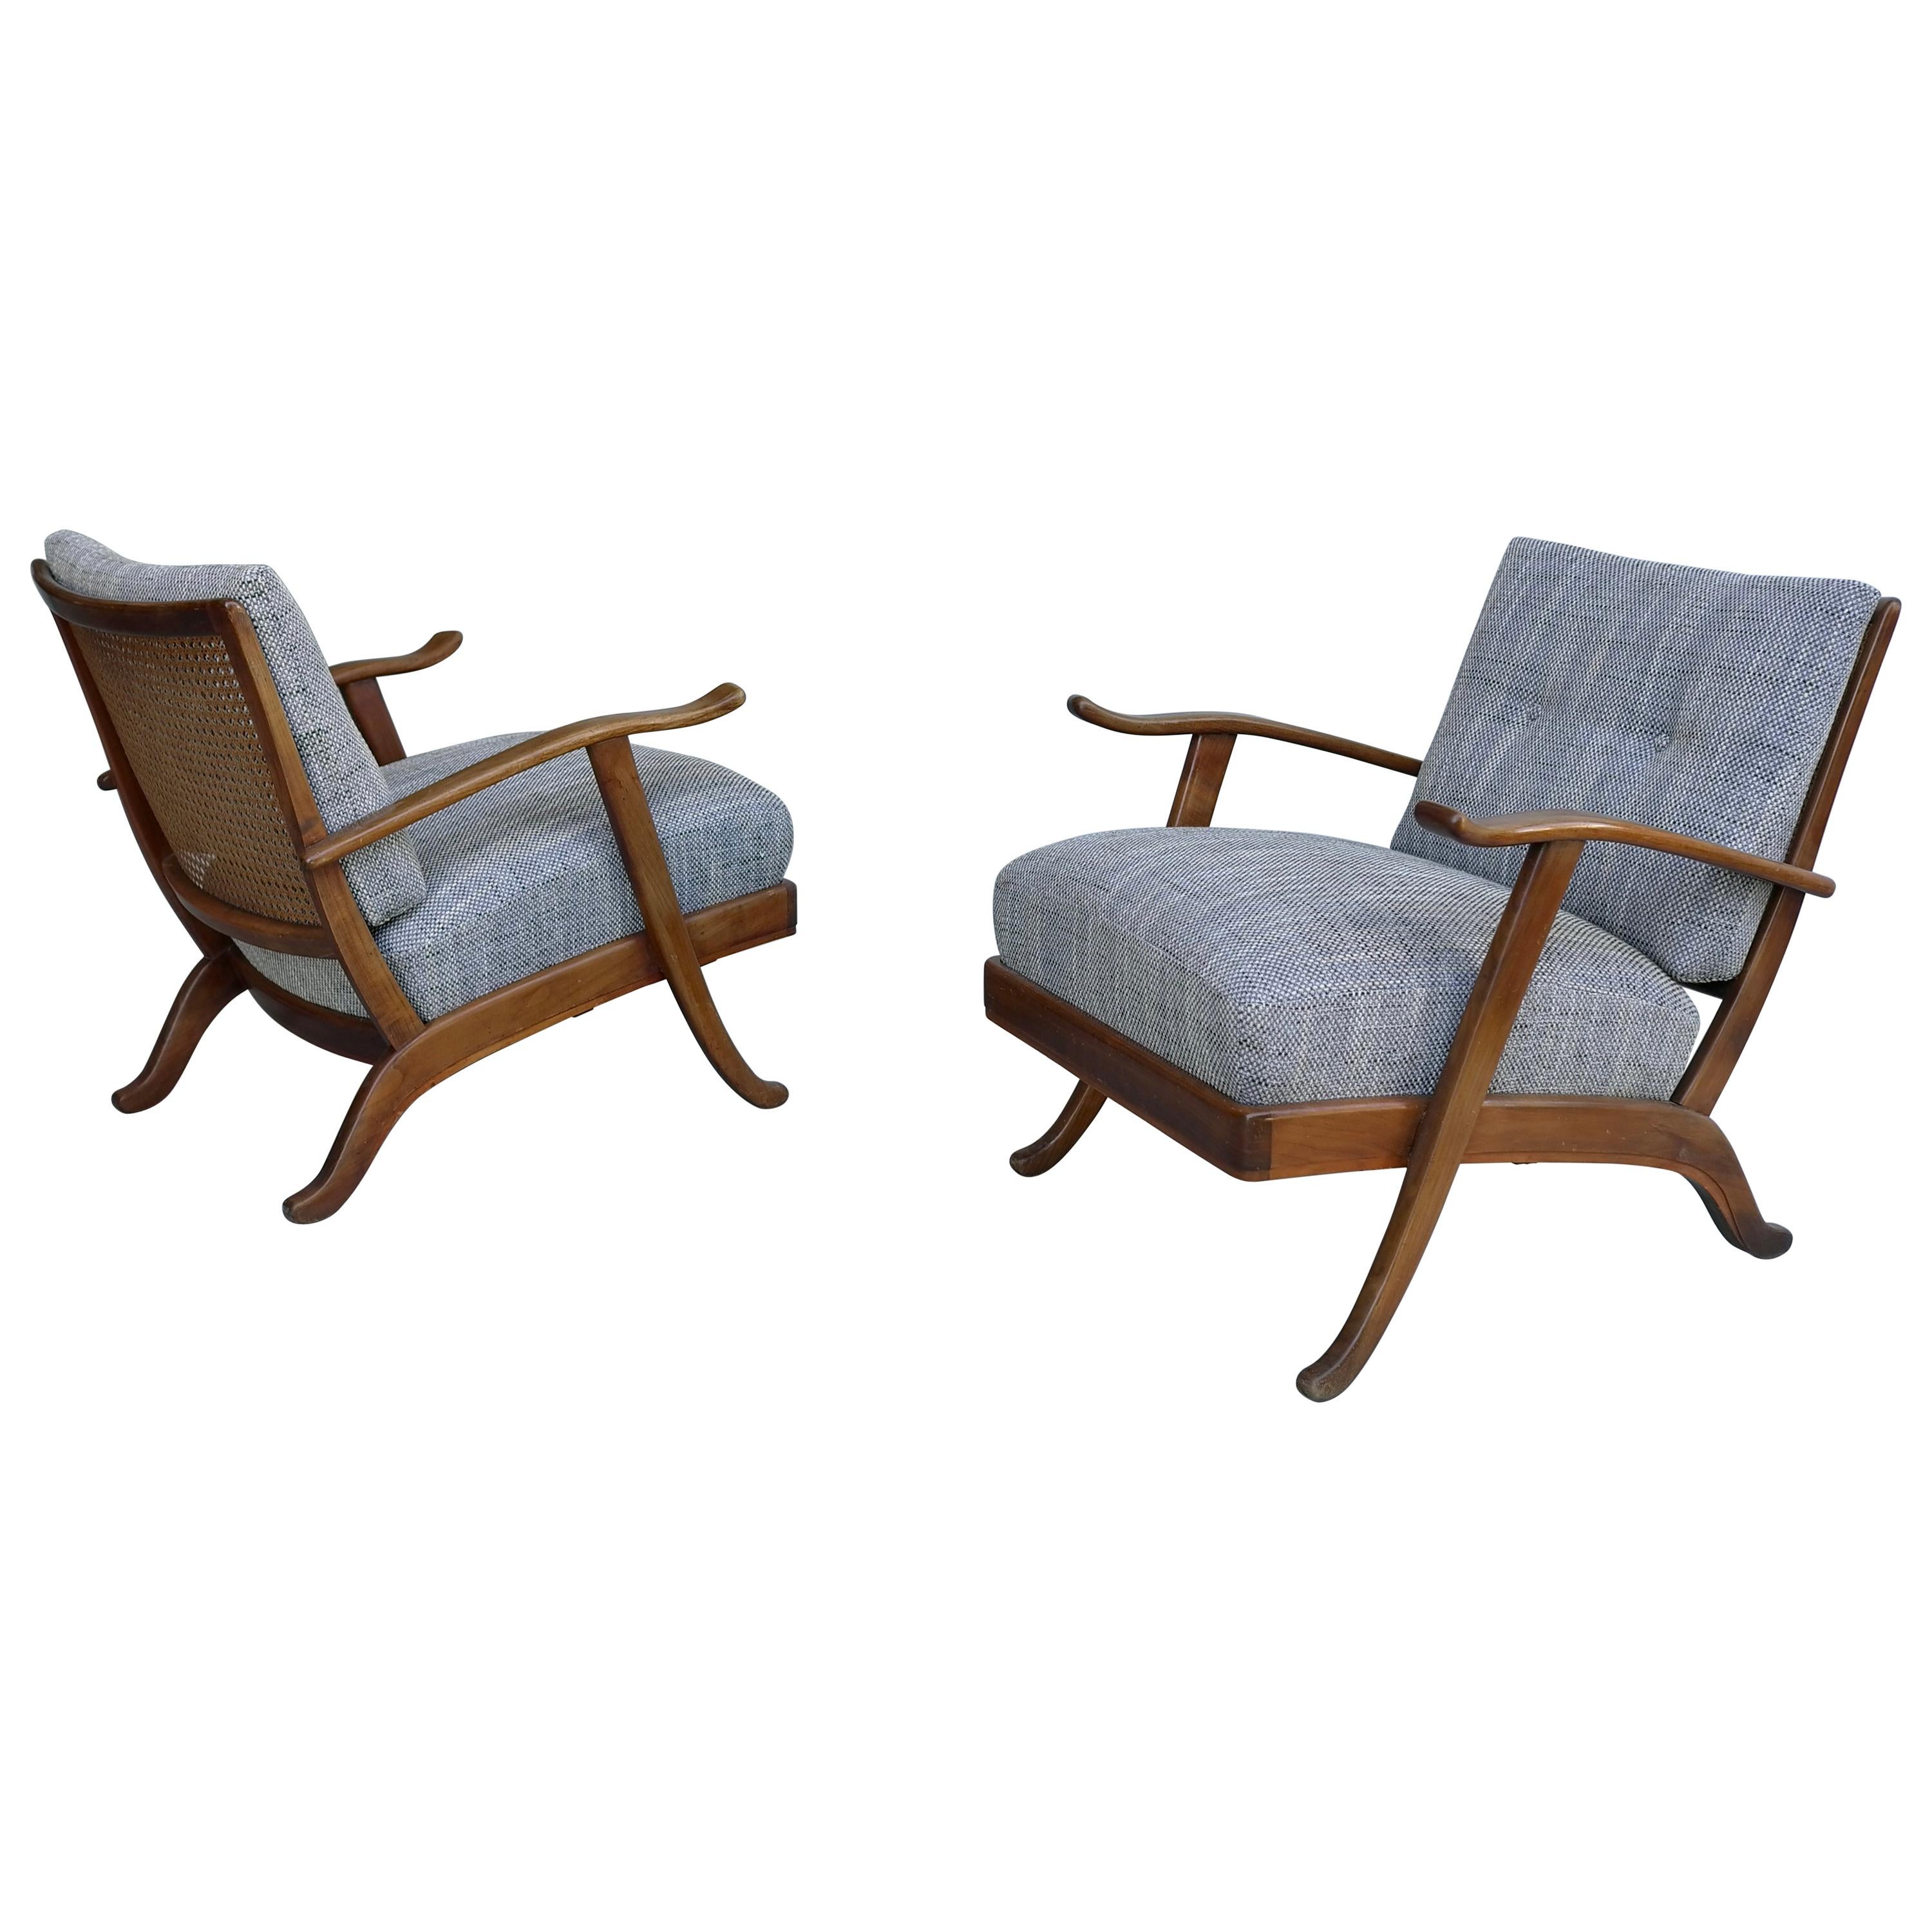 Pair of Organic Lounge Chair in Wood and Wicker, Italy, 1950s